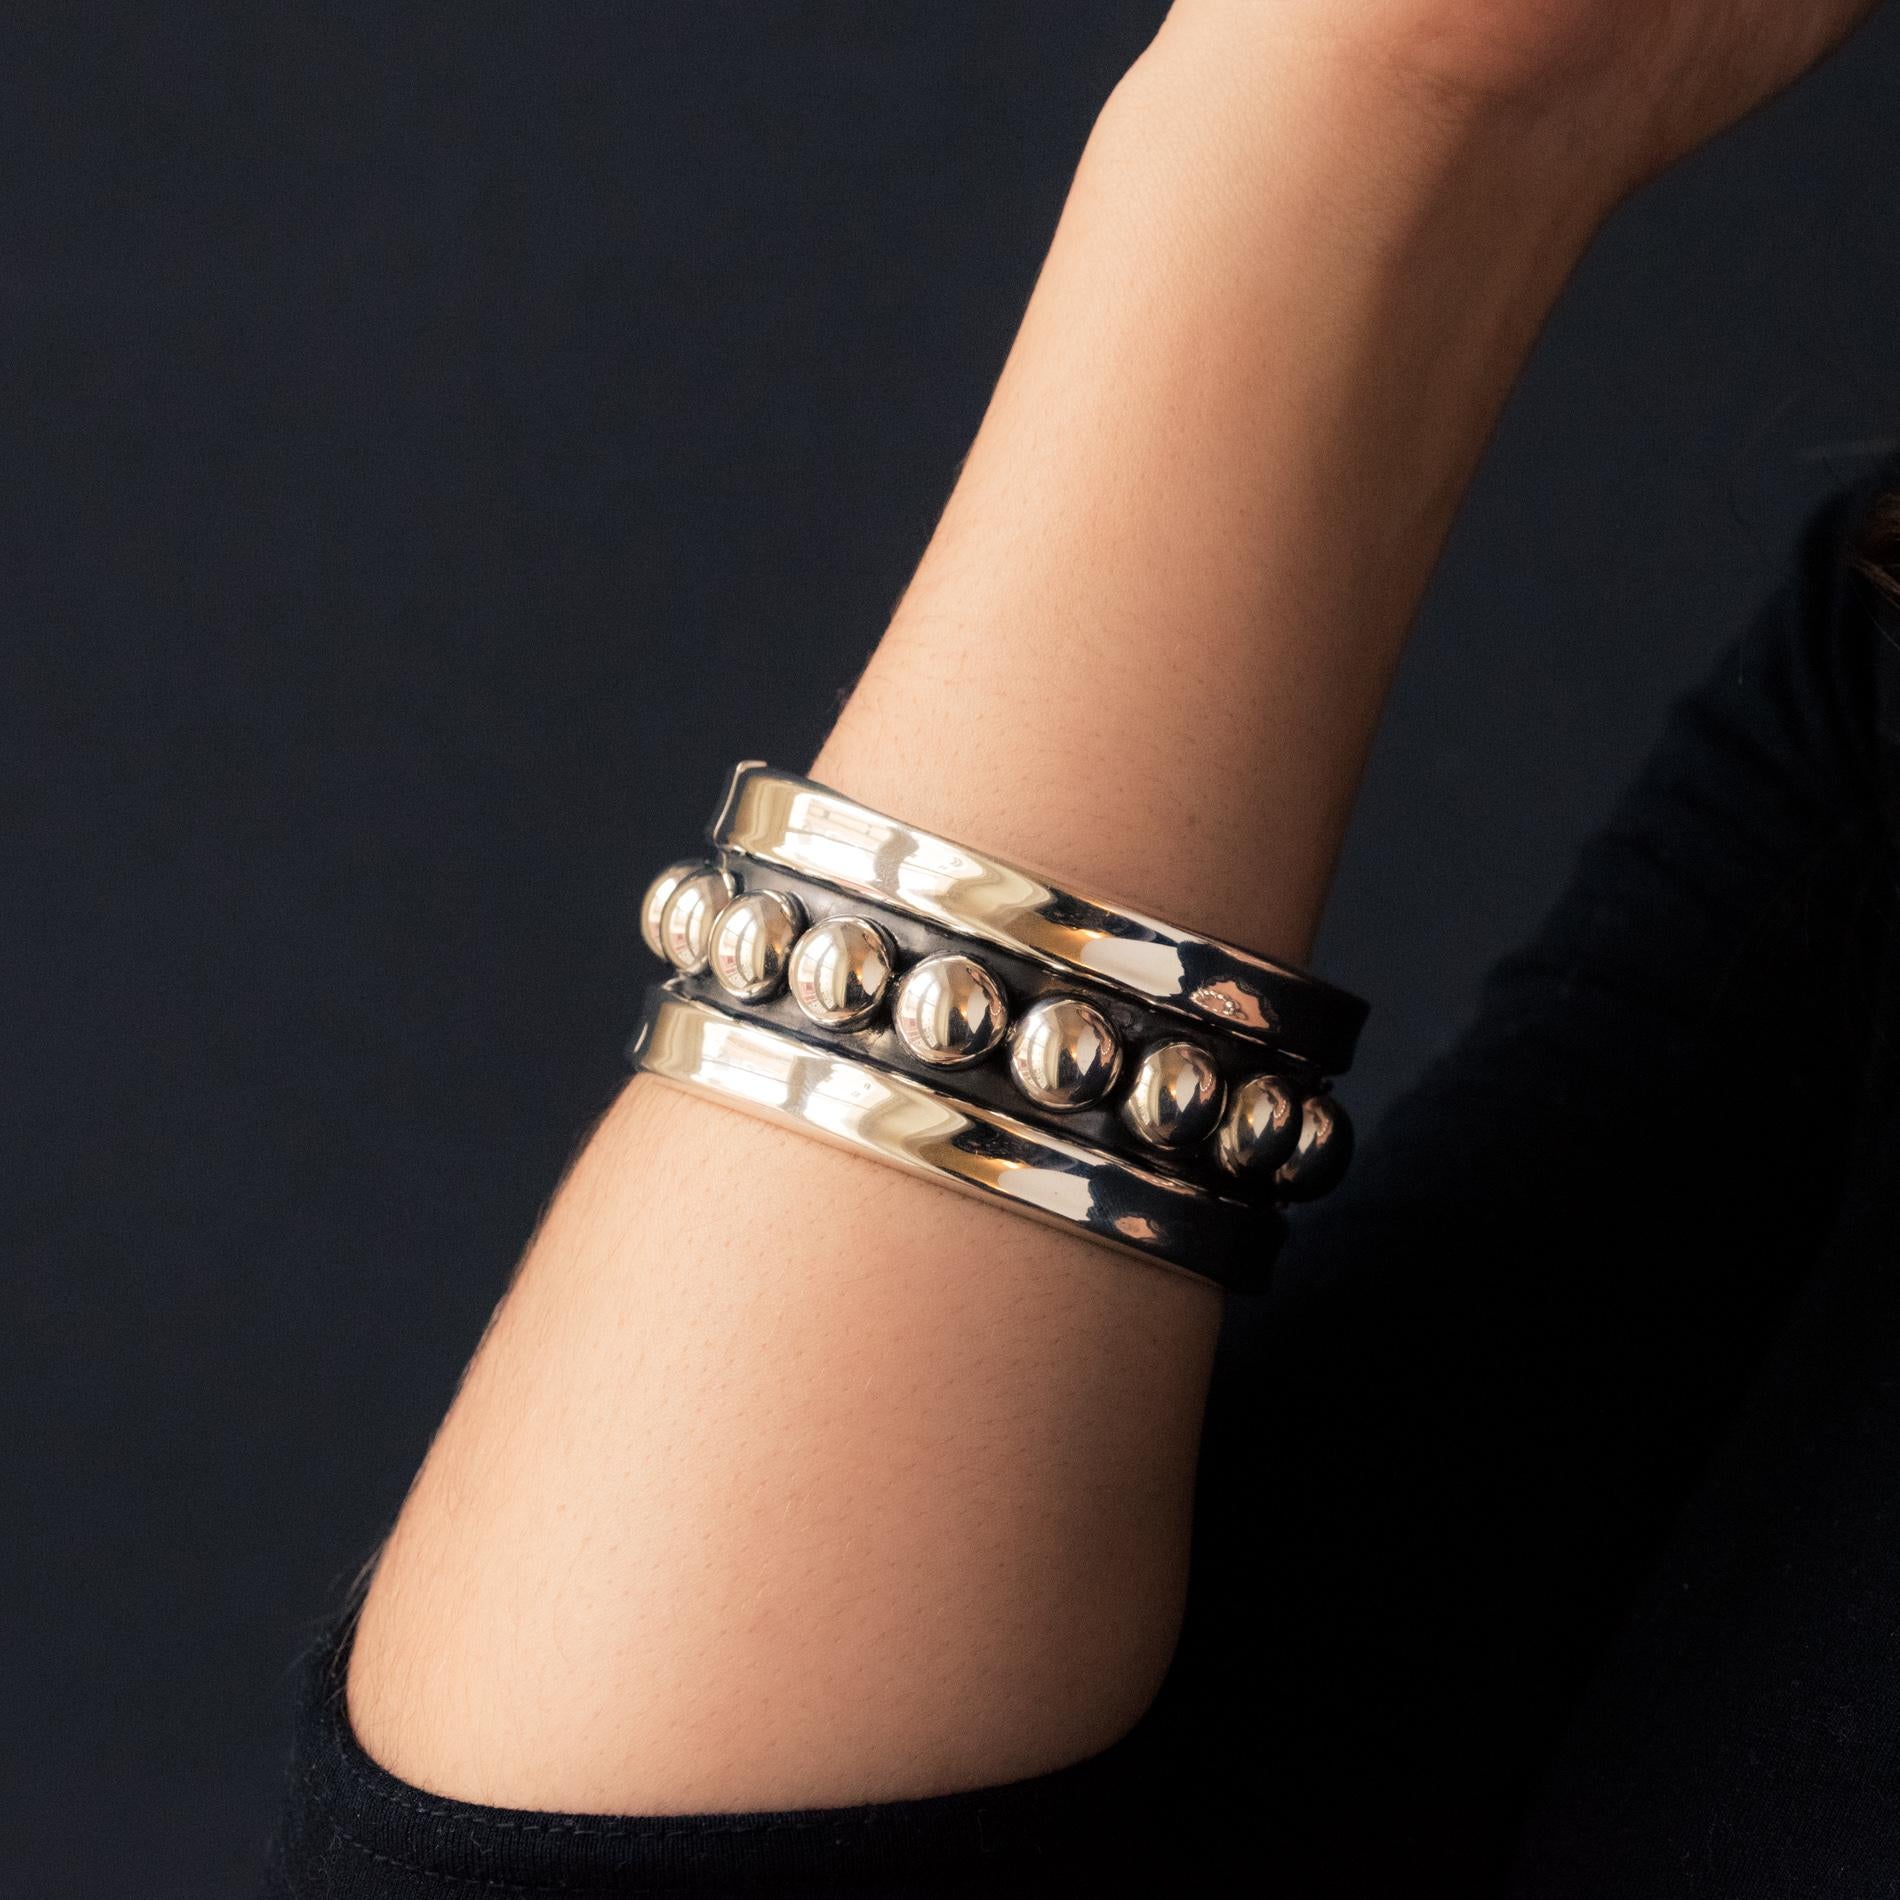 Bracelet in silver.
The large center of this silver bangle bracelet is adorned with silver pearls on a gray and matte background. On both sides, the edges form a slight gutter. It is opening on the top by a spring hinge located at the base.
Inner